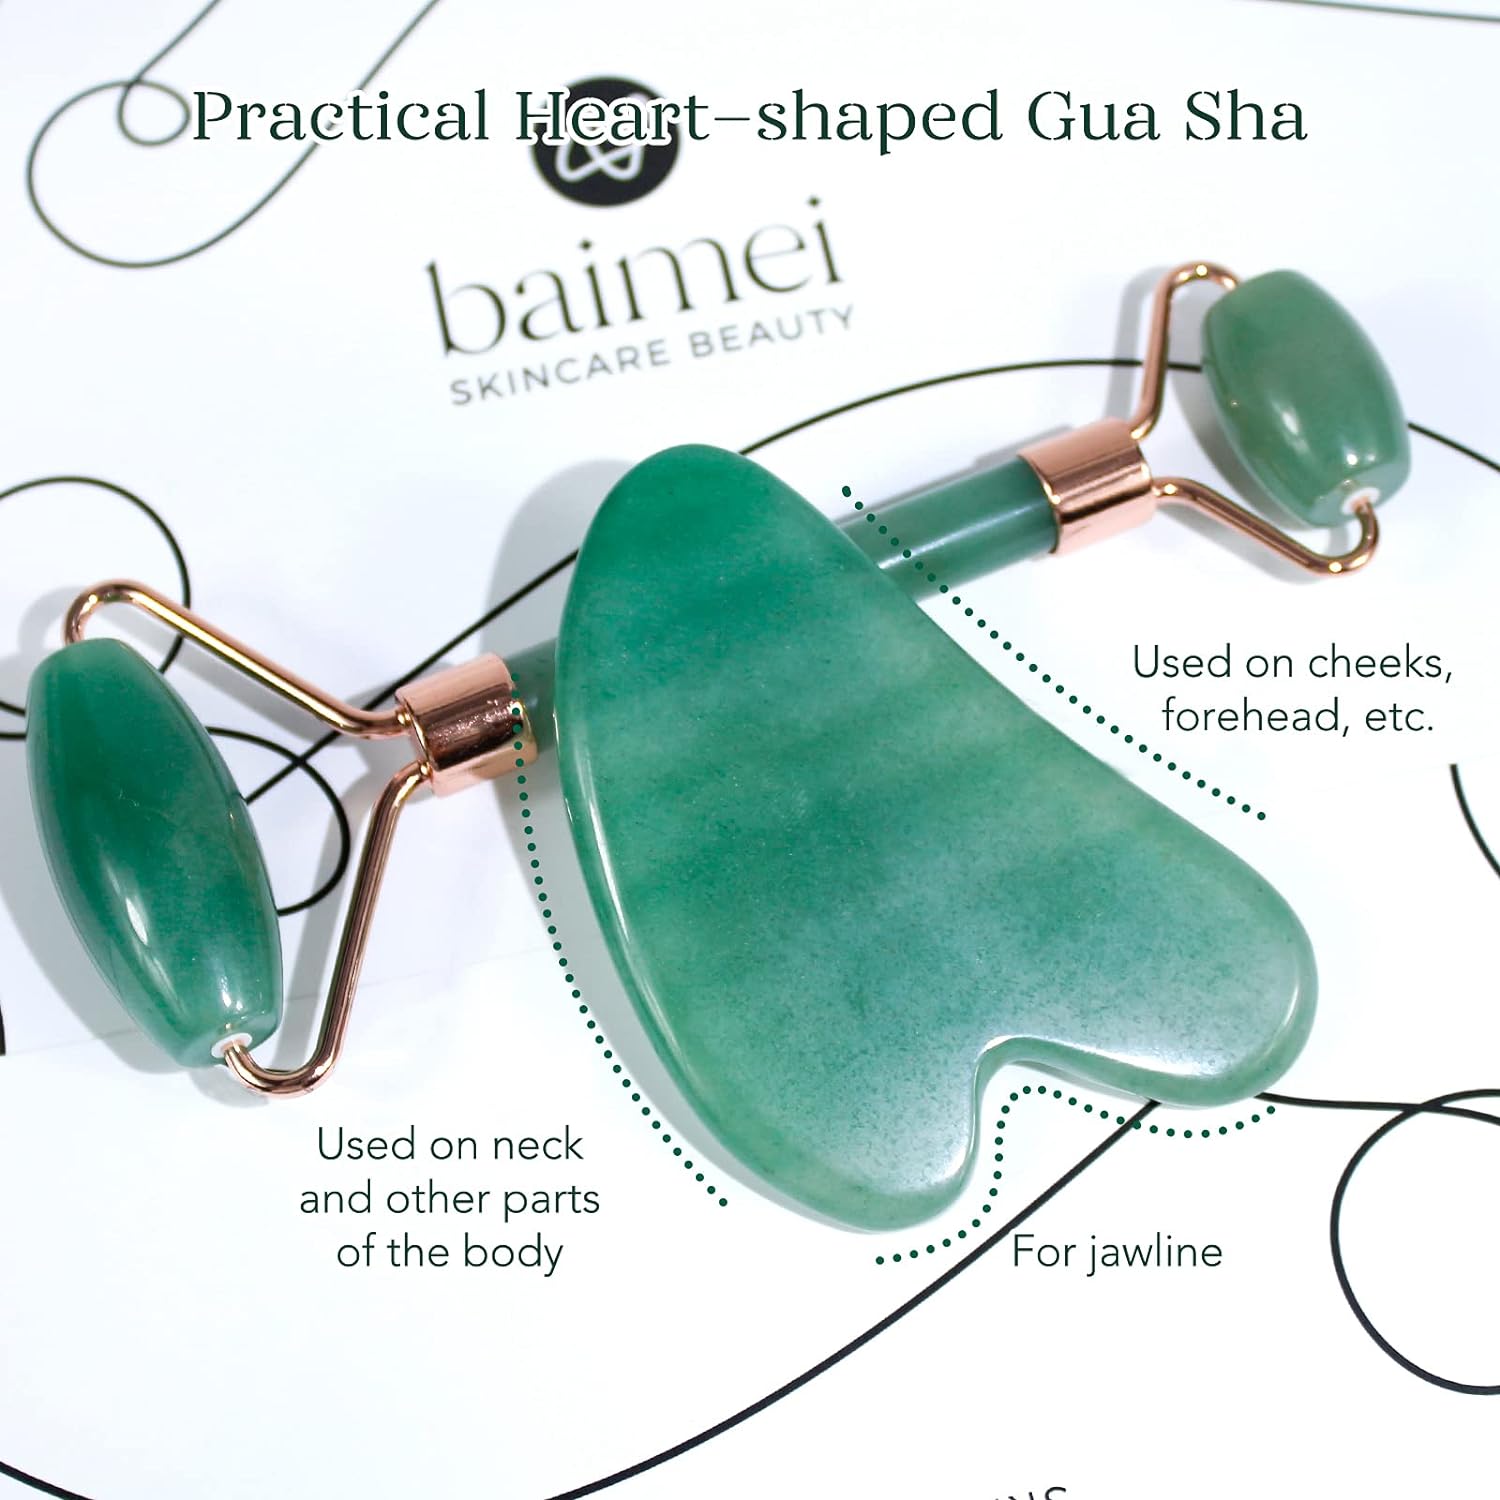 Baimei Icyme Gua Sha  Jade Roller Facial Tools Face Roller And Gua Sha Set For Puffiness And Redness Reducing Skin Care Routine, Self Care Gift For Men Women - Green